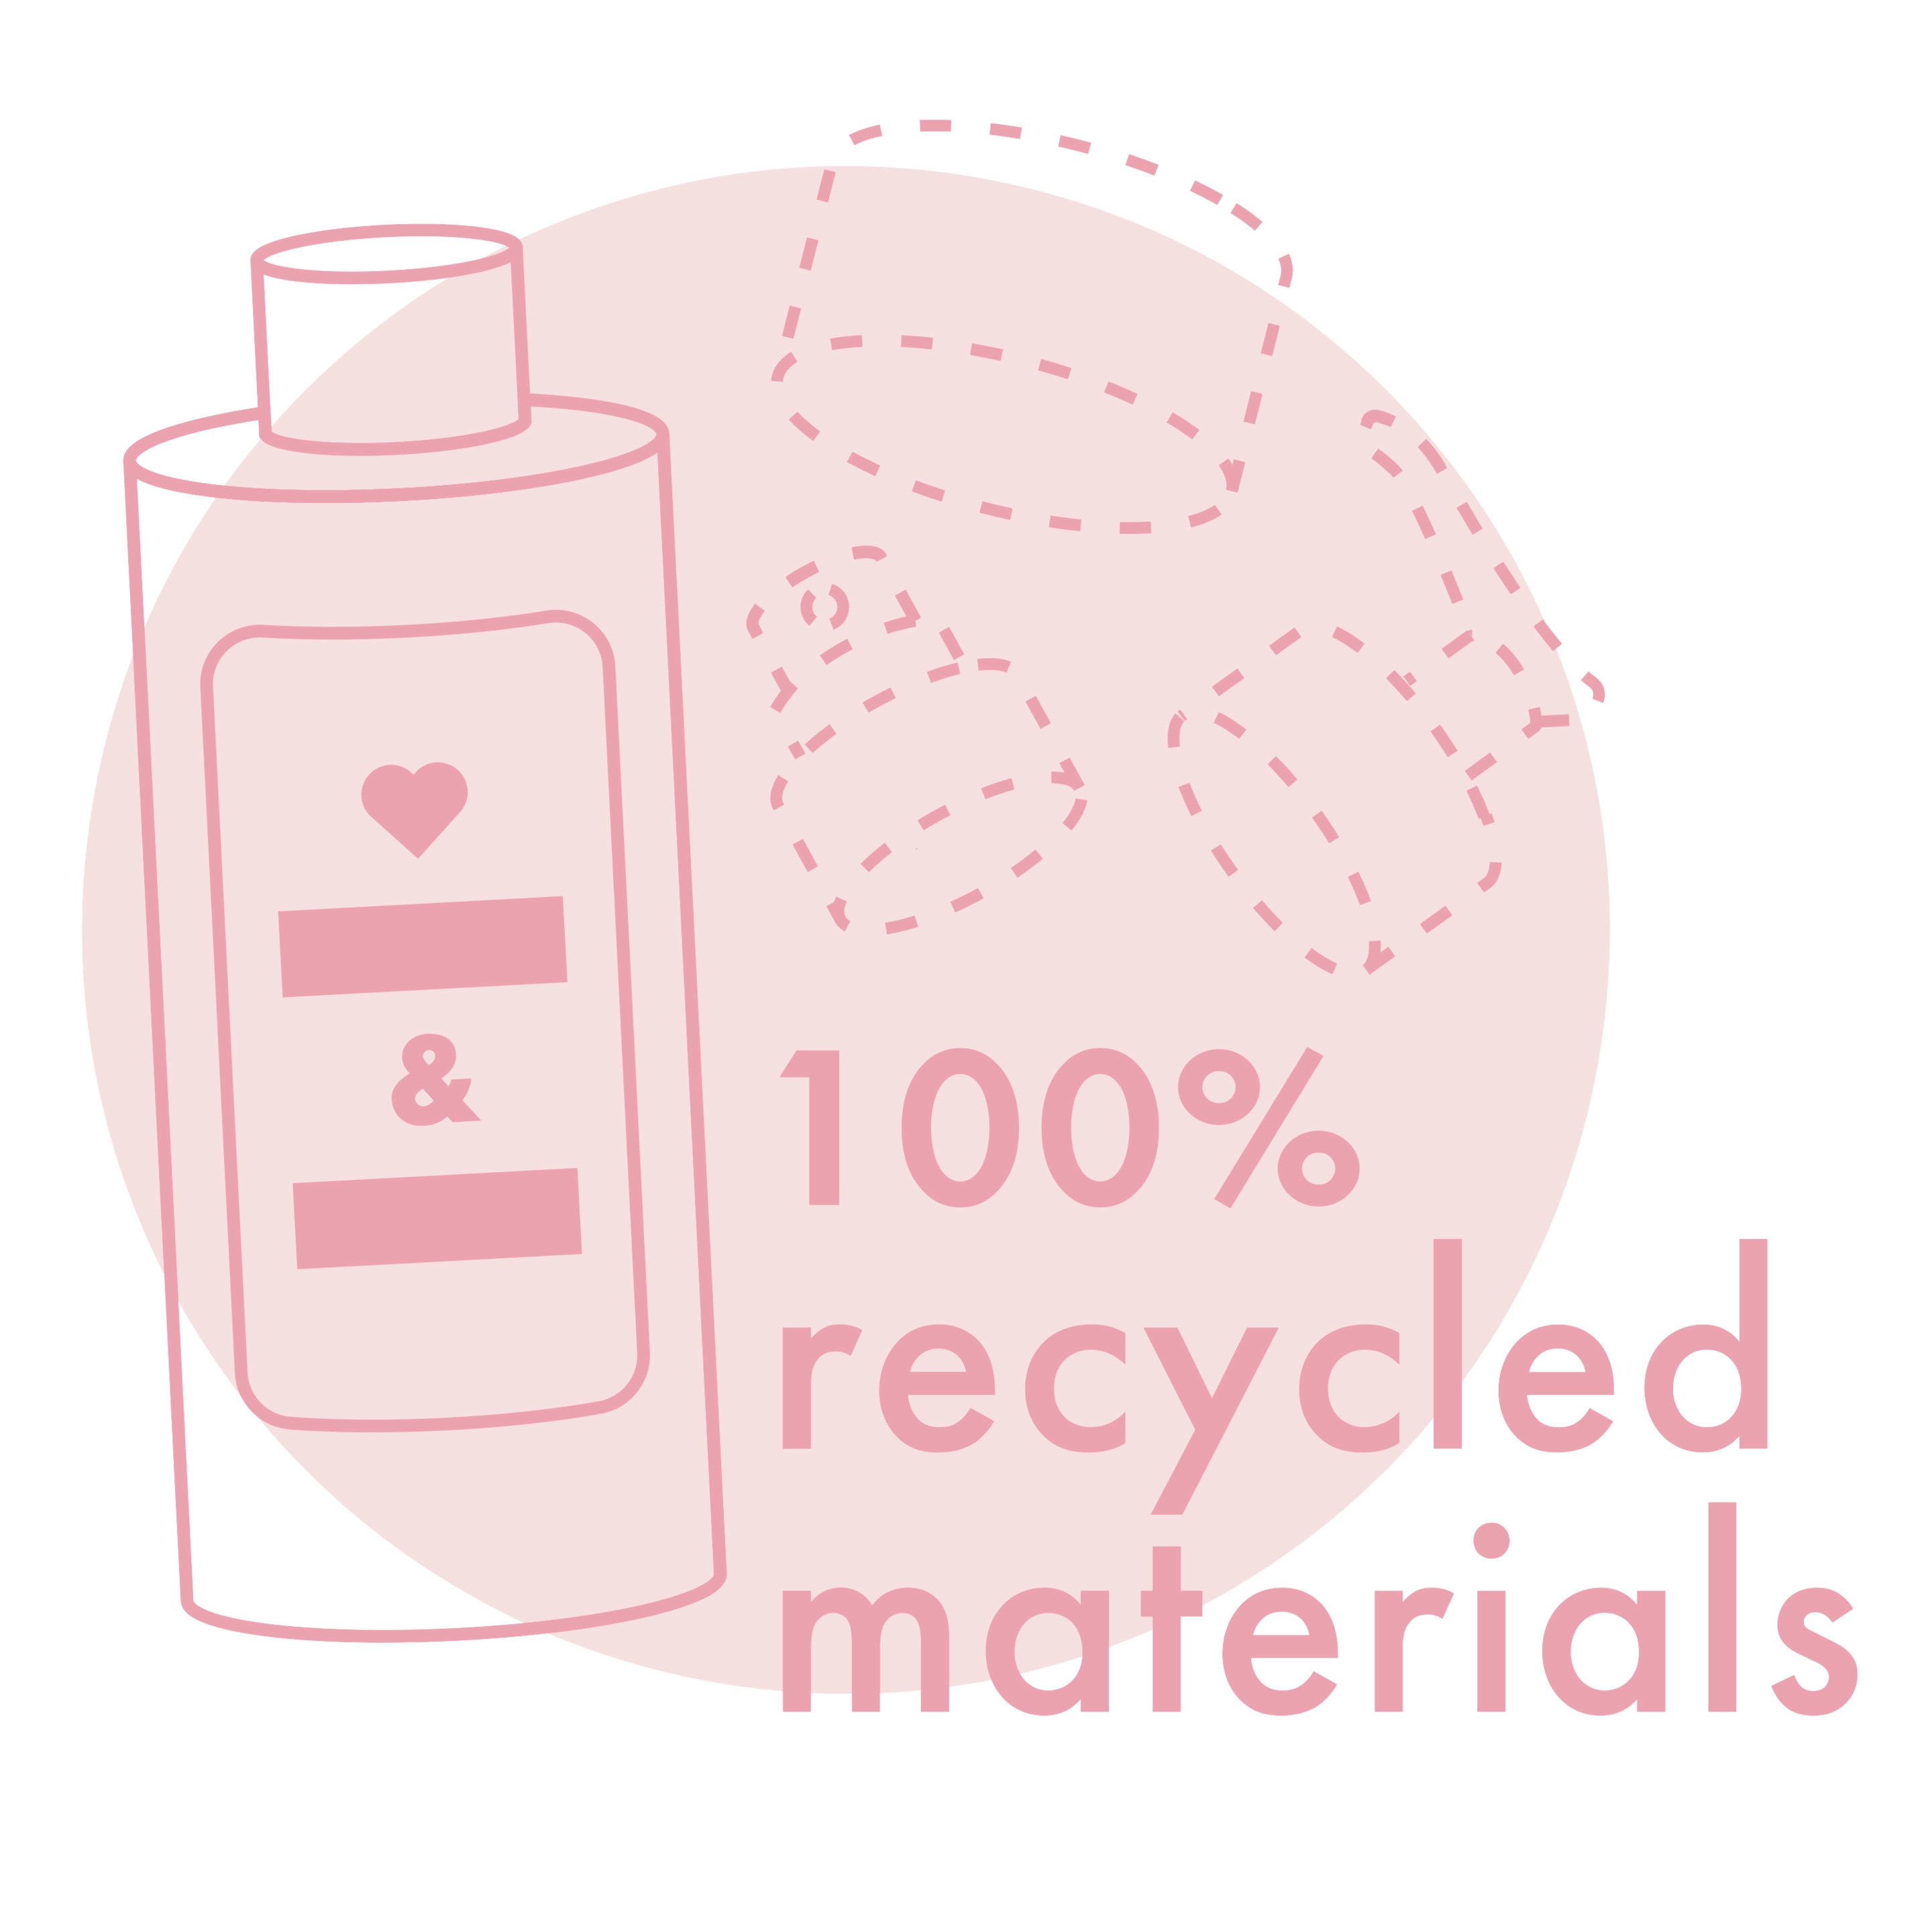 Reducing waste image Text